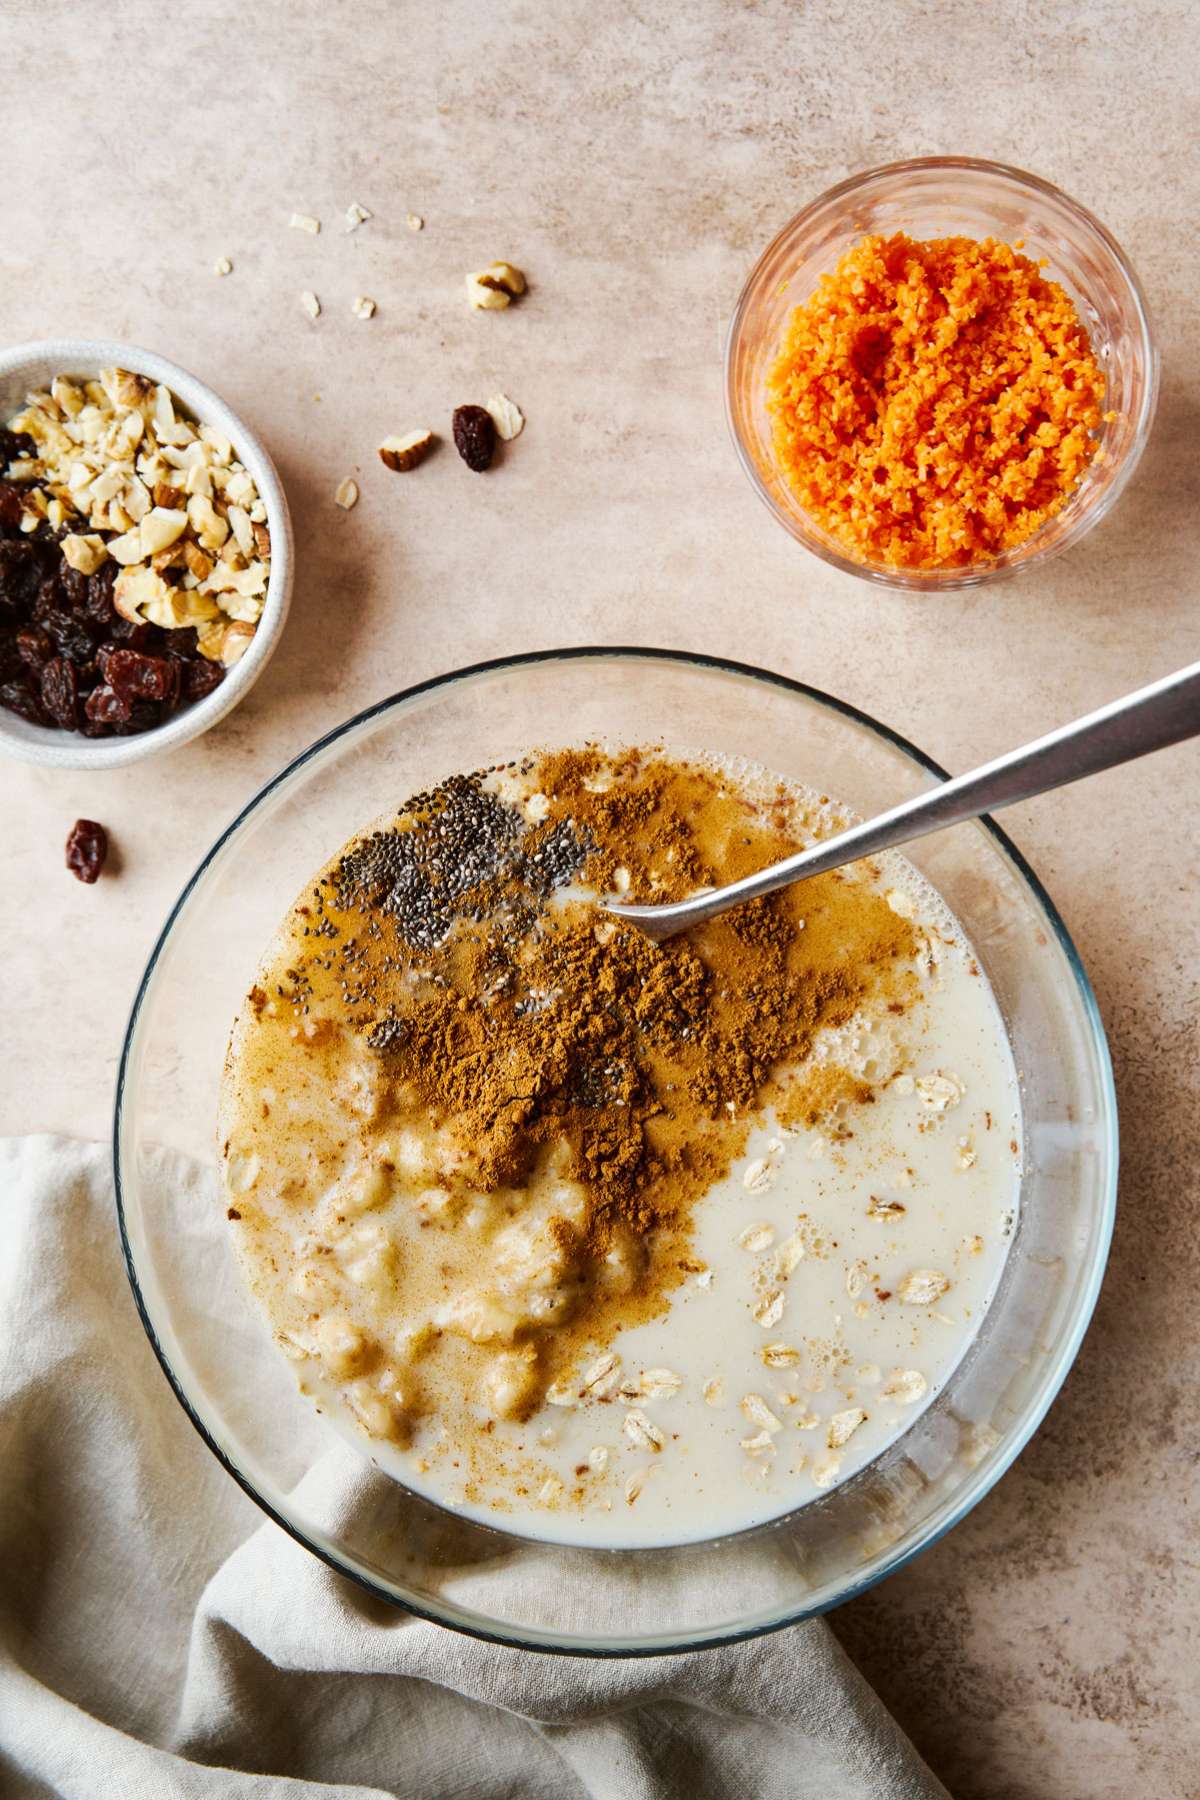 Combining milk with mashed banana, chia seeds and spices in a large bowl.